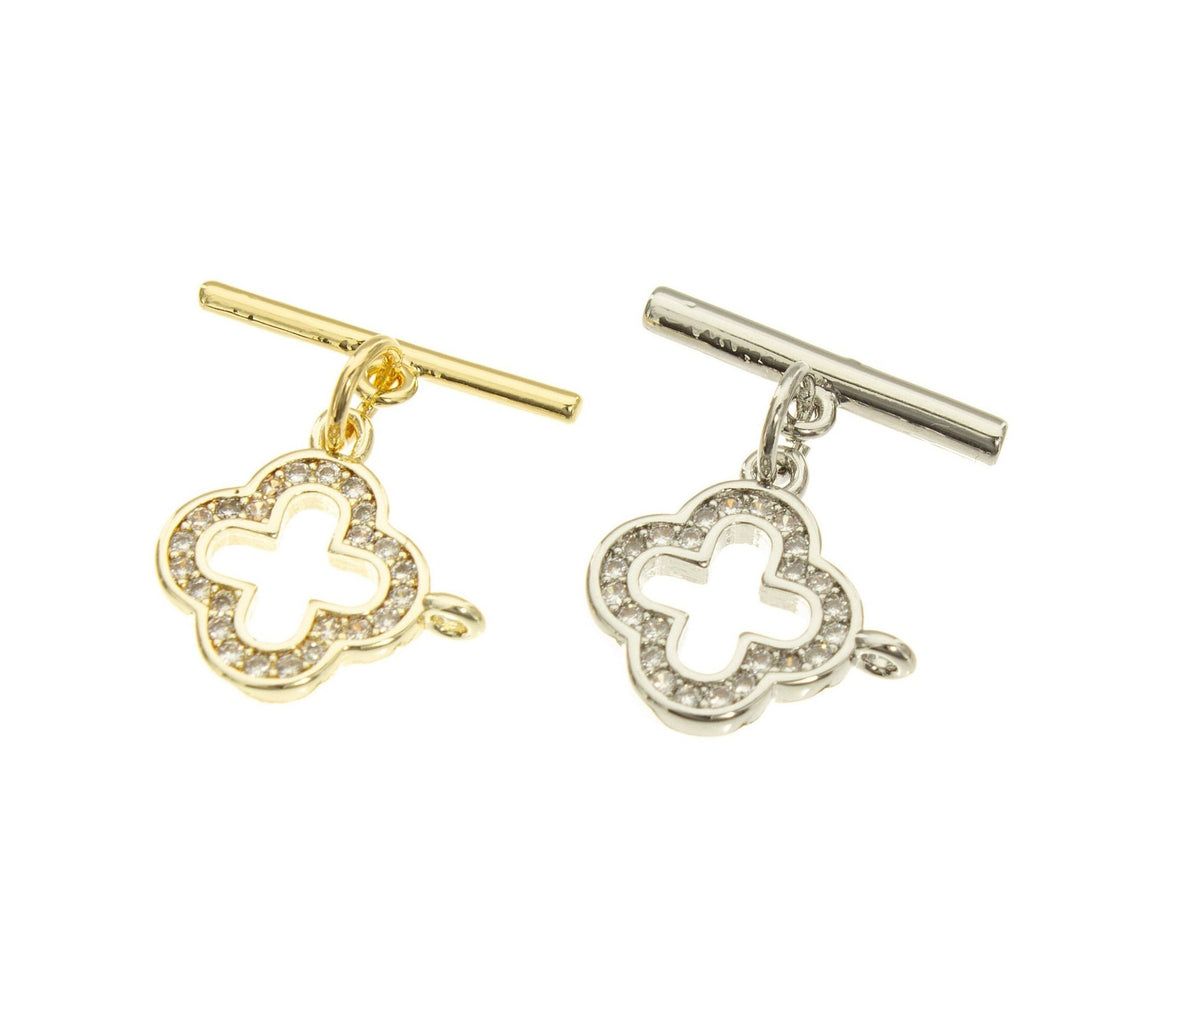 Clover Pave Toggle Clasp,CZ Flower Toggle Clasp,Gold Pave CZ Toggle Clasp For DIY Jewelry,CLG004,CLS004